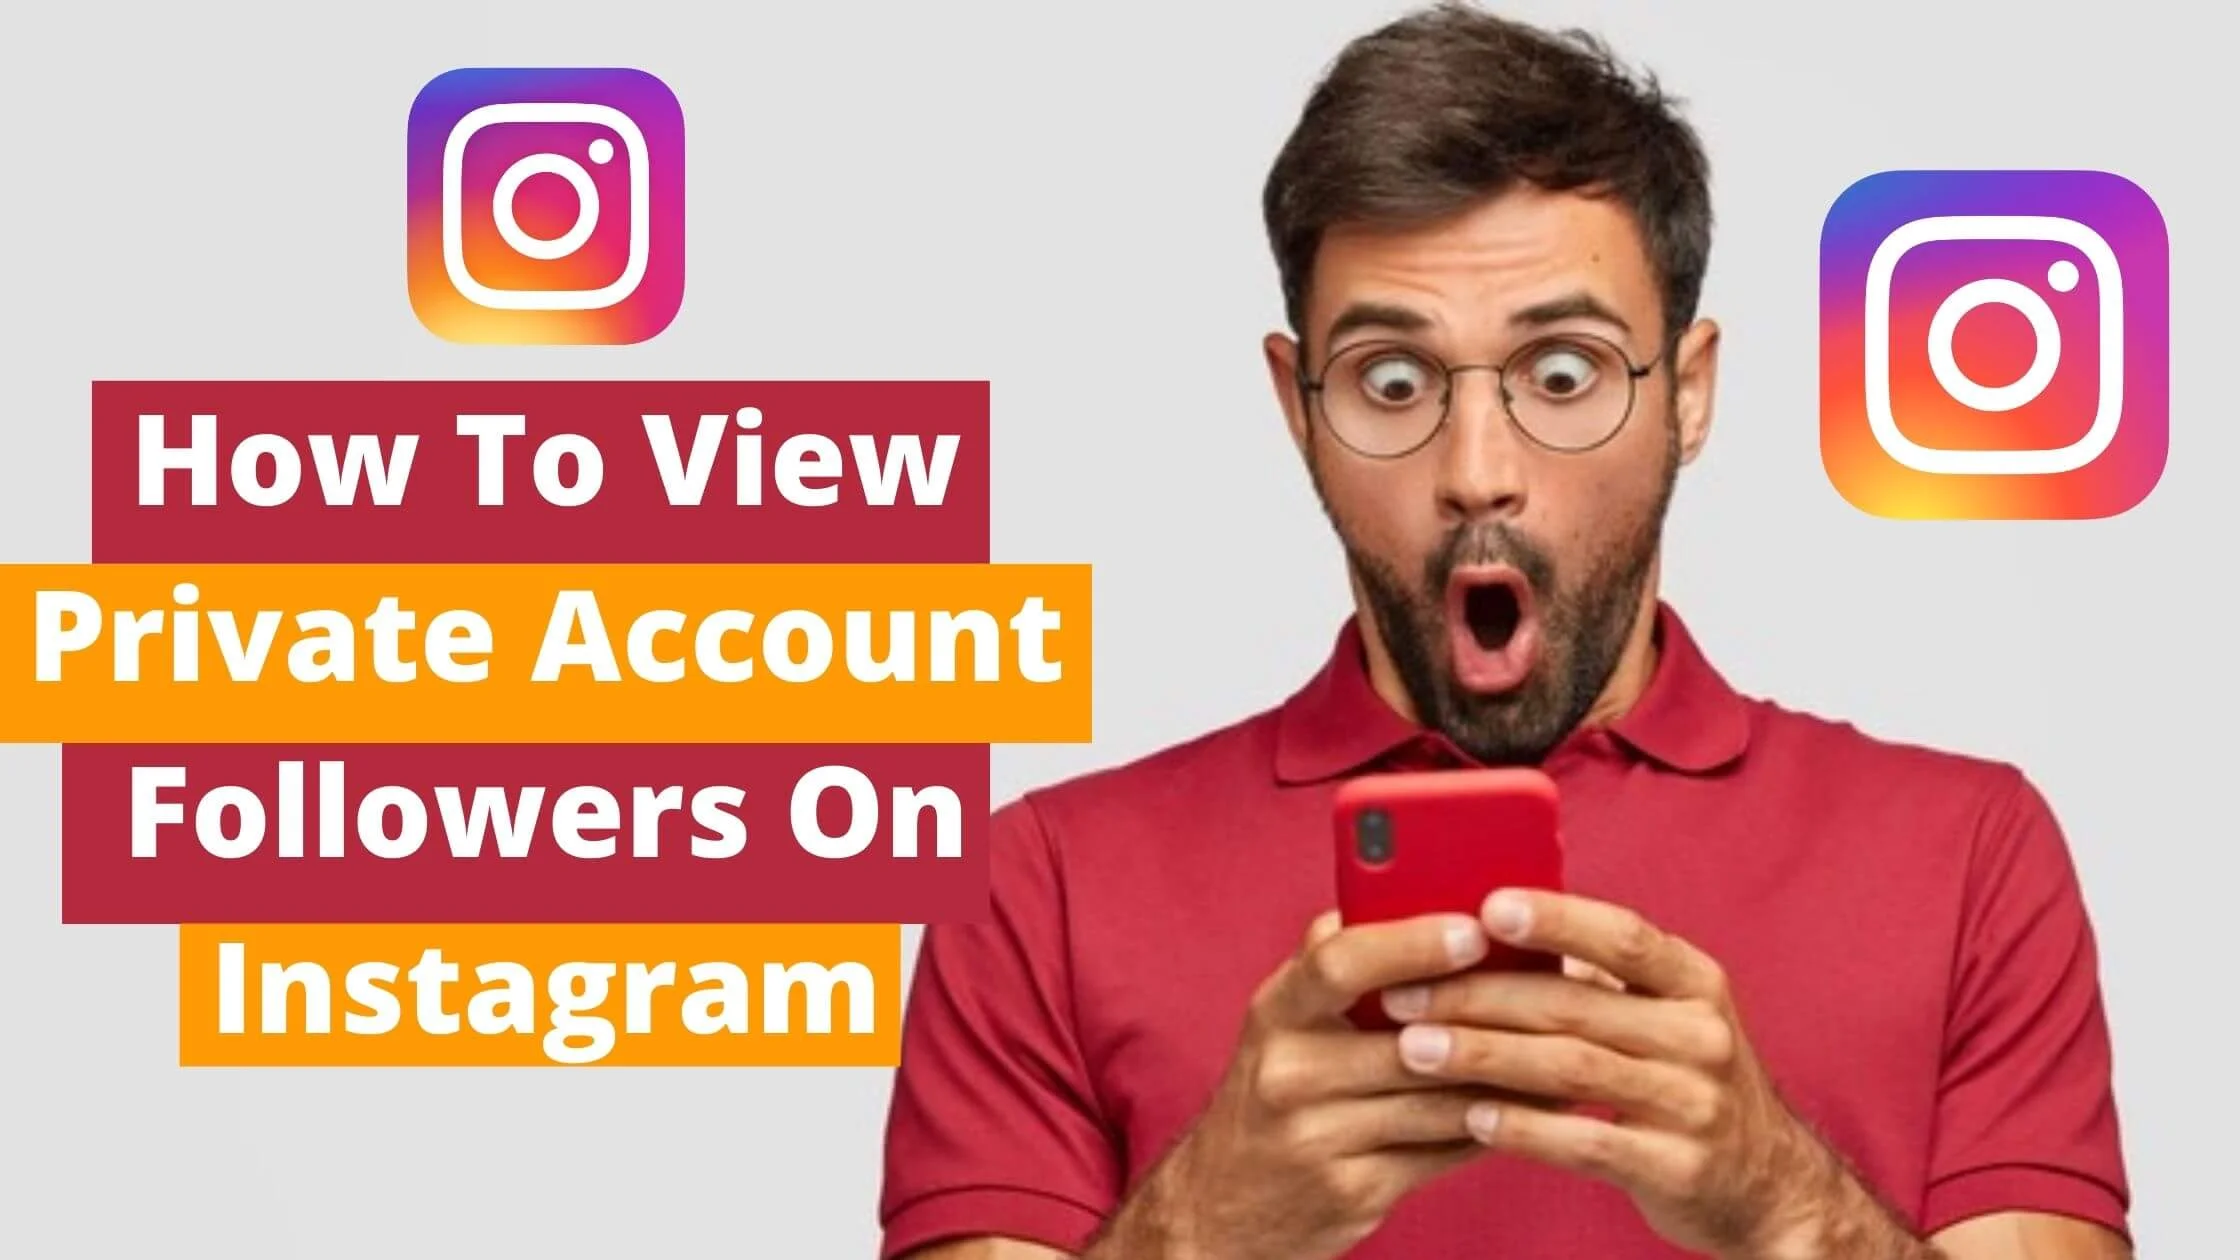 How To View Private Account Followers On Instagram